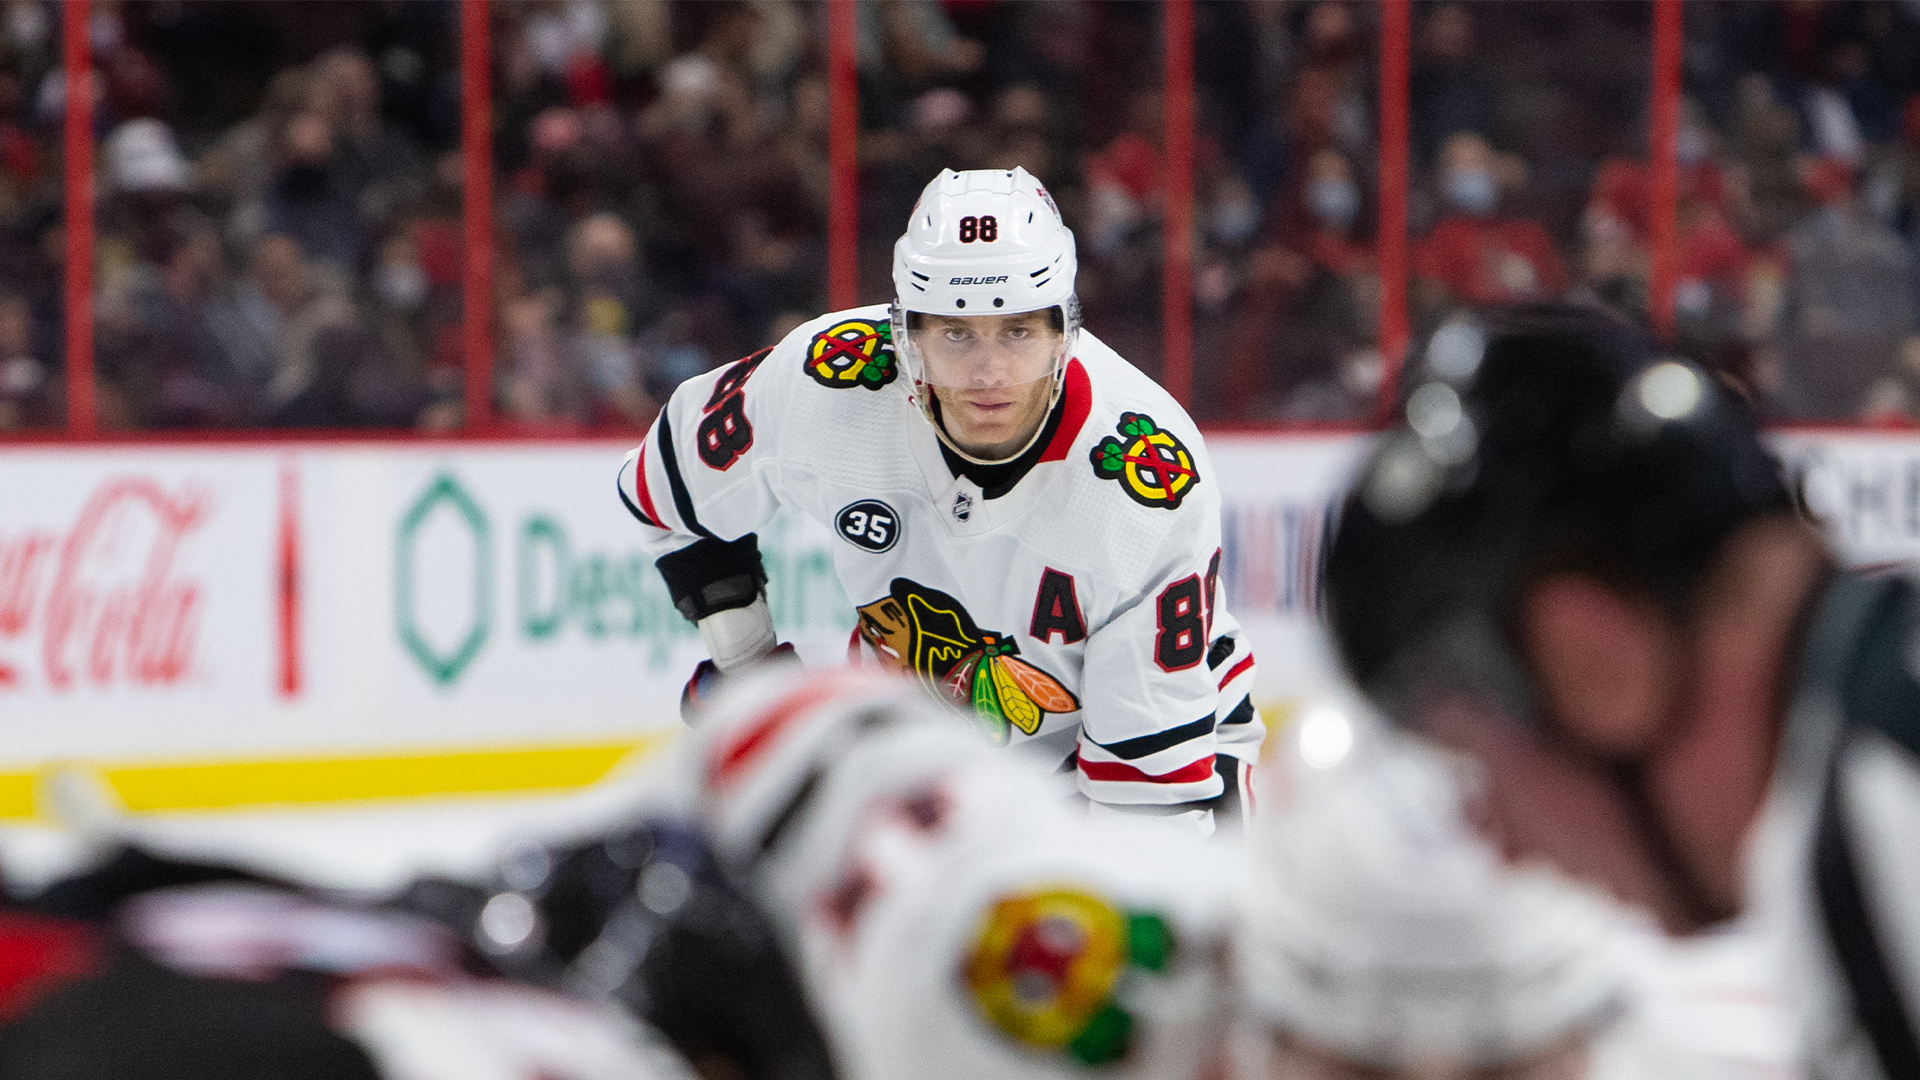 Patrick Kane scores 400th goal in a win over Red Wings – NBC Sports Chicago